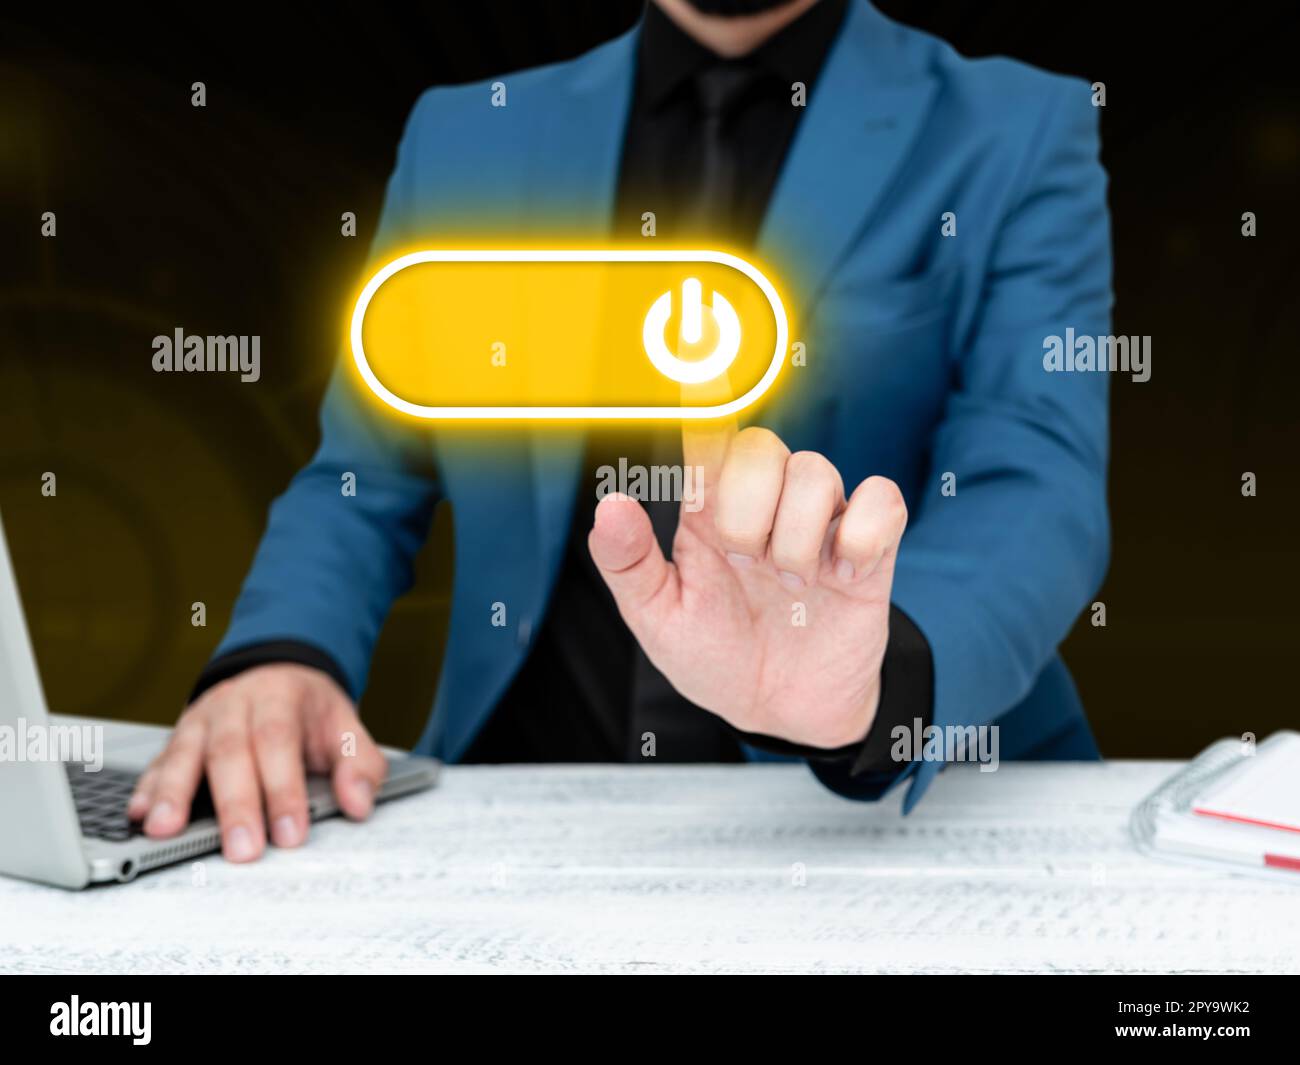 Businessman in blue jacket sitting at the white table and pressing virtual button. Laptop laying on the desk.Futuristic style image with colored glow. Stock Photo